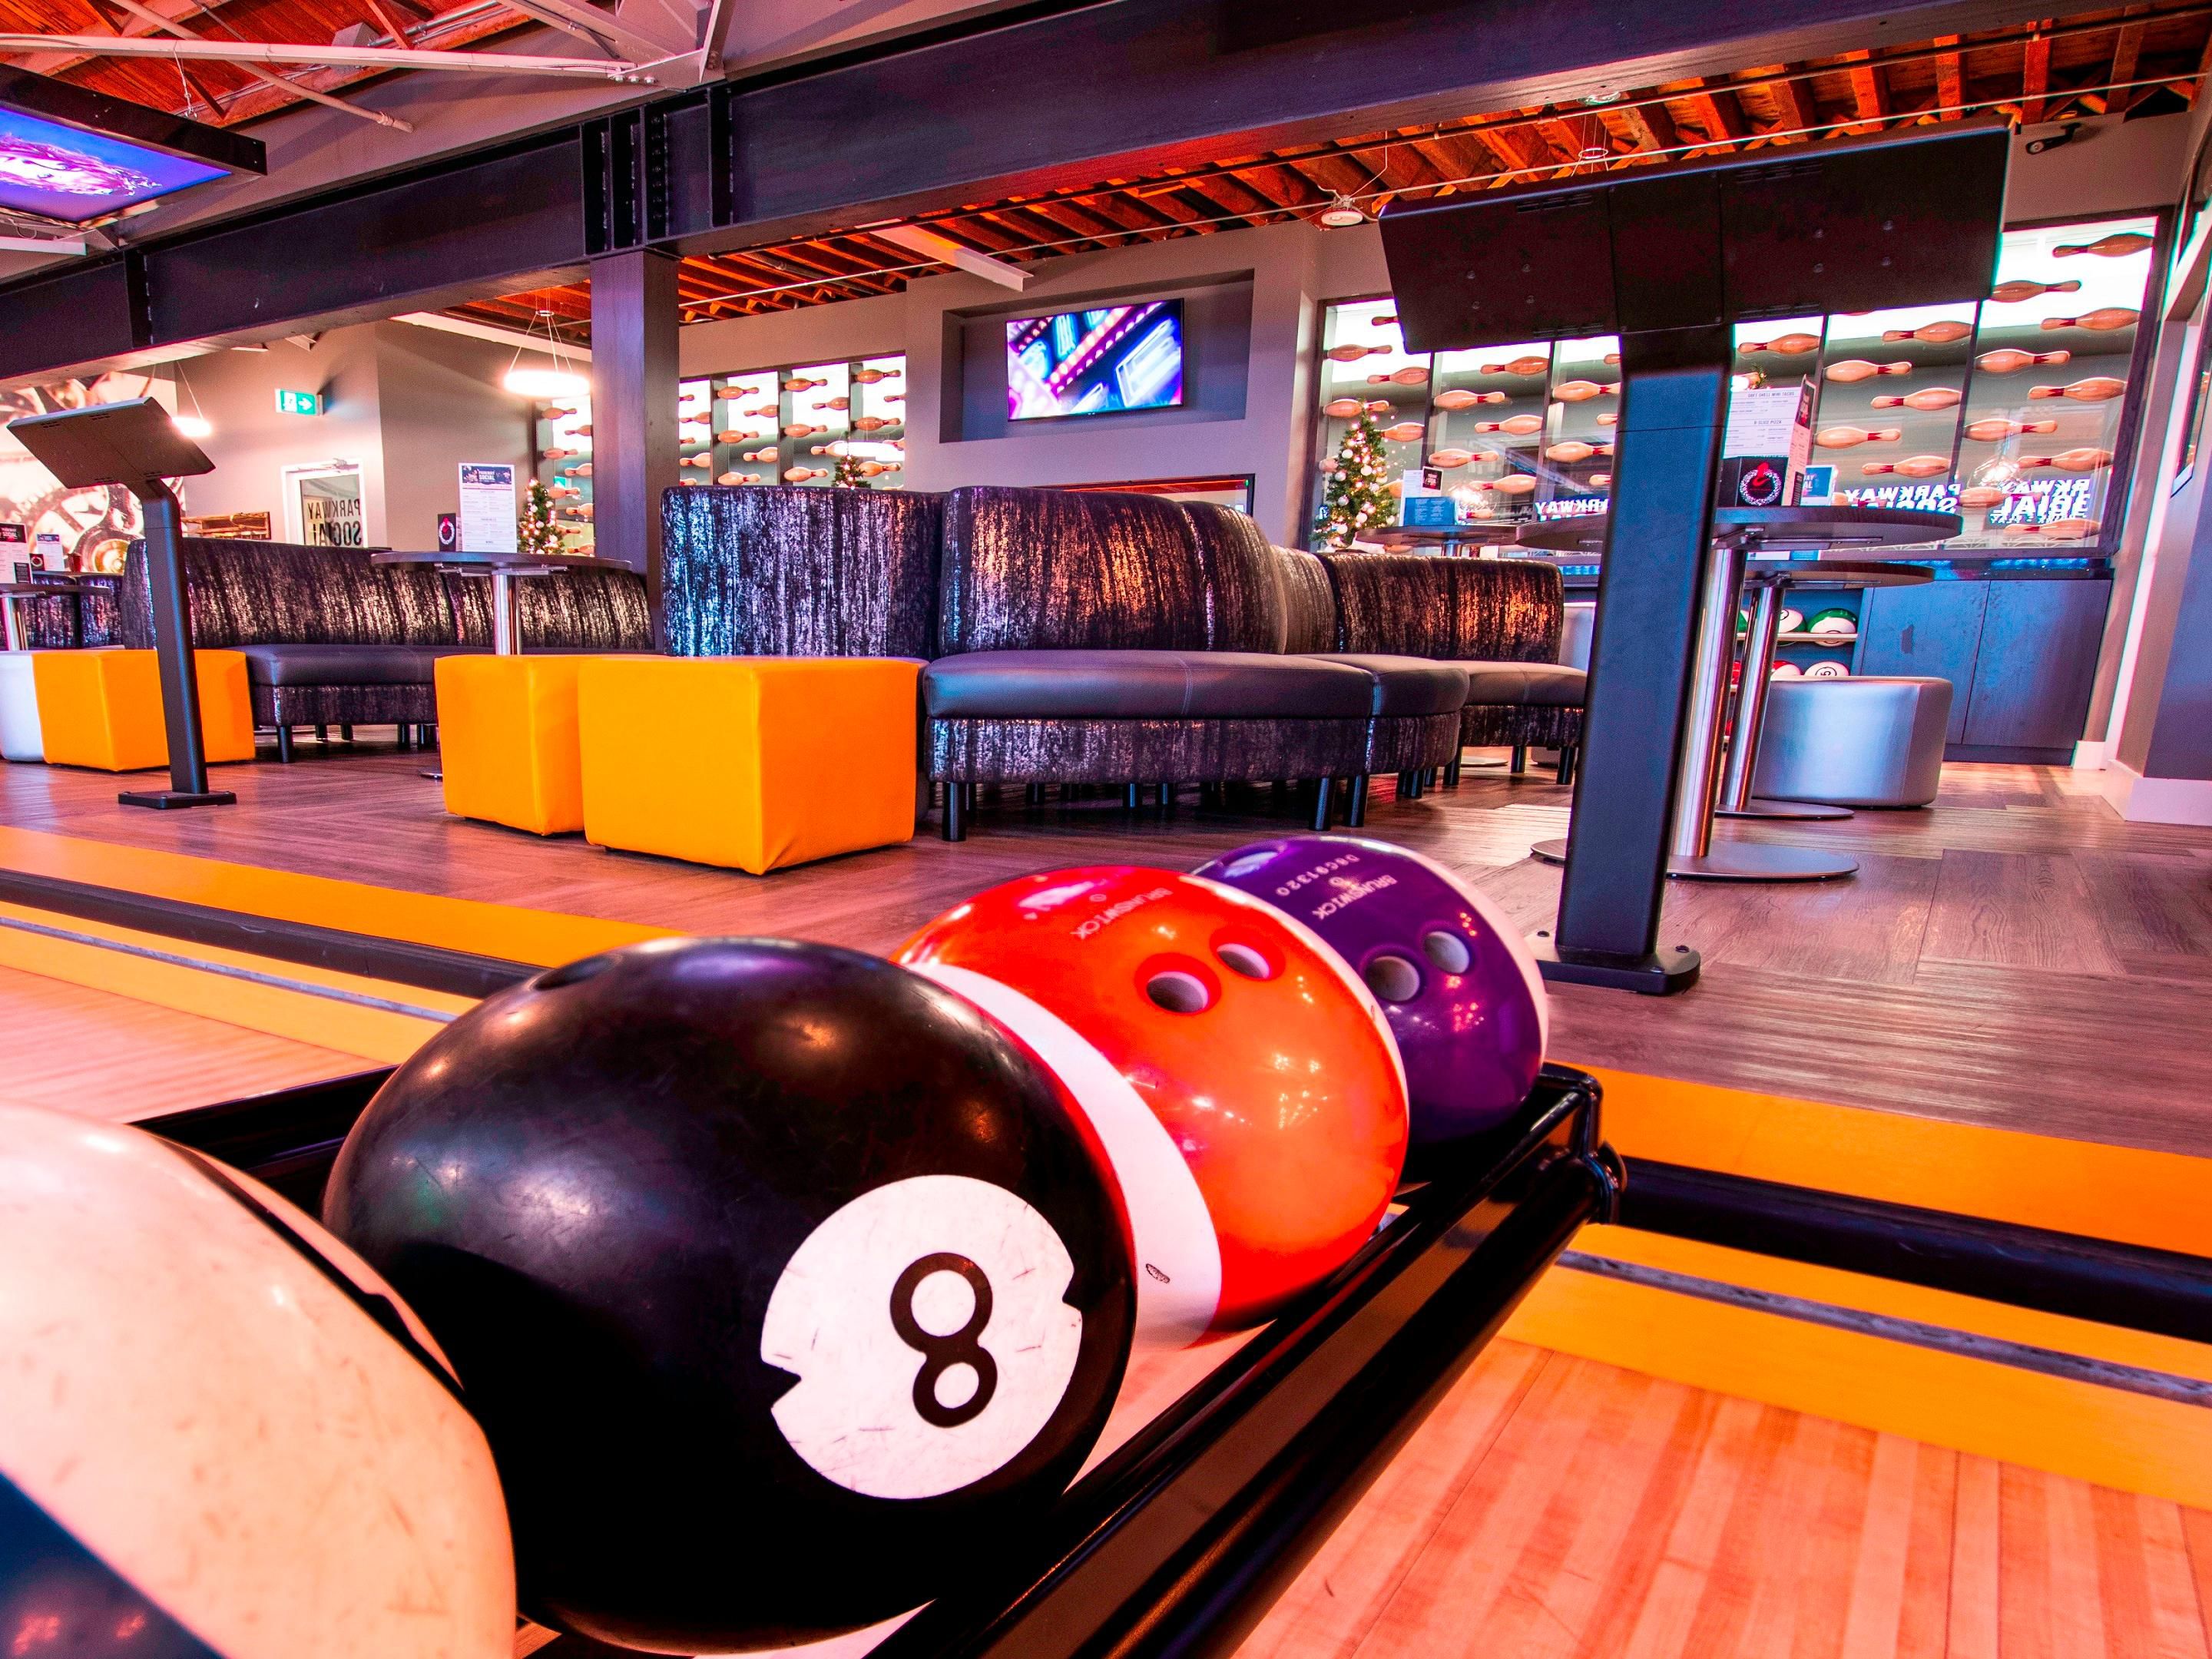 Our onsite Parkway Social features 30-lanes of bowling, a full arcade, laser tag and a full bar with 50-inch HDTV for catching games. This is a great place for any event - a birthday party, a corporate team event, a fun family-outing, or a date night. 